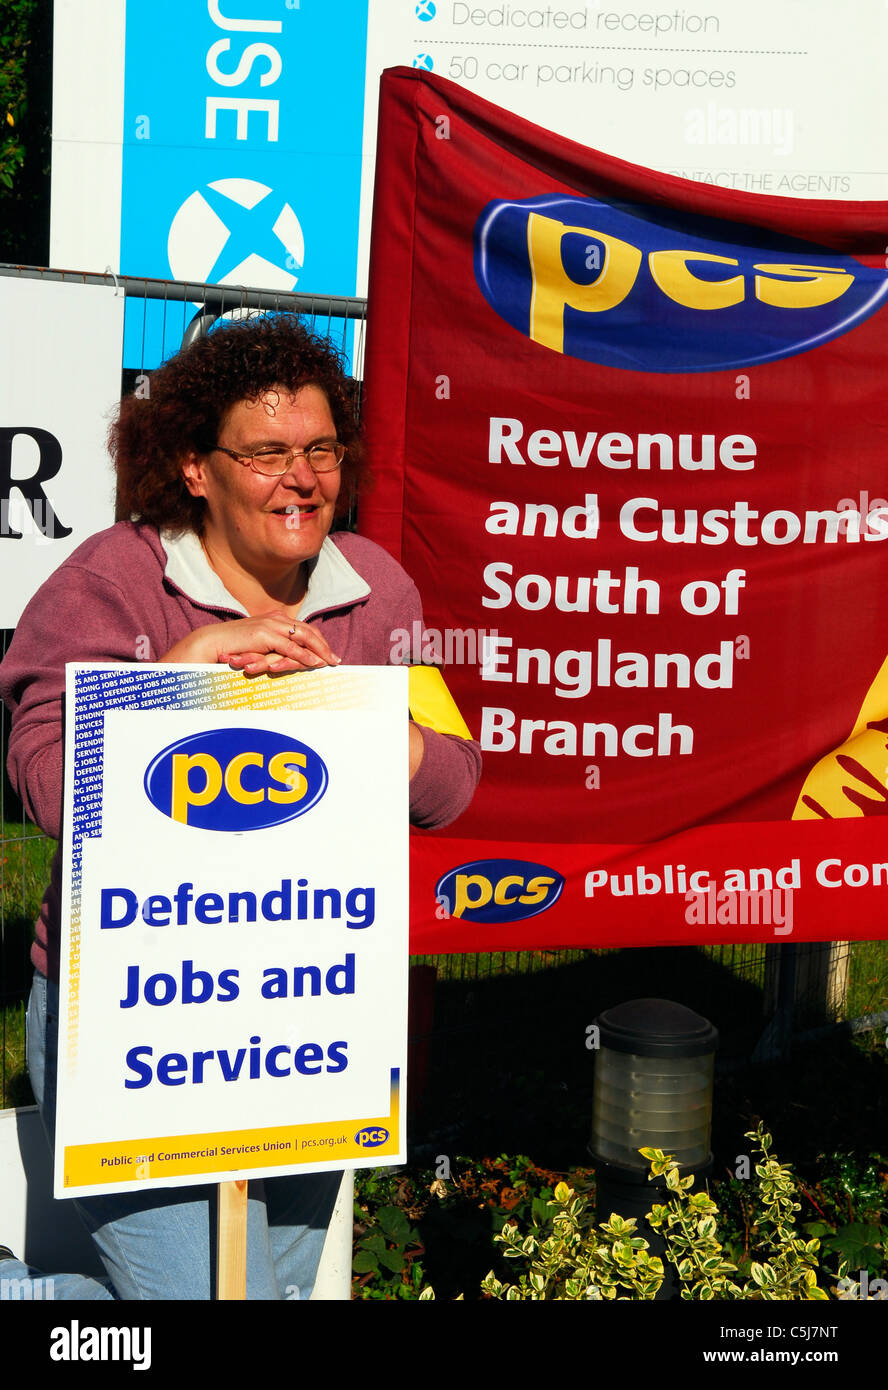 PCS public sector workers striking during protest against public sector cuts, Southampton, Hampshire, UK. 30 June 2011. Stock Photo